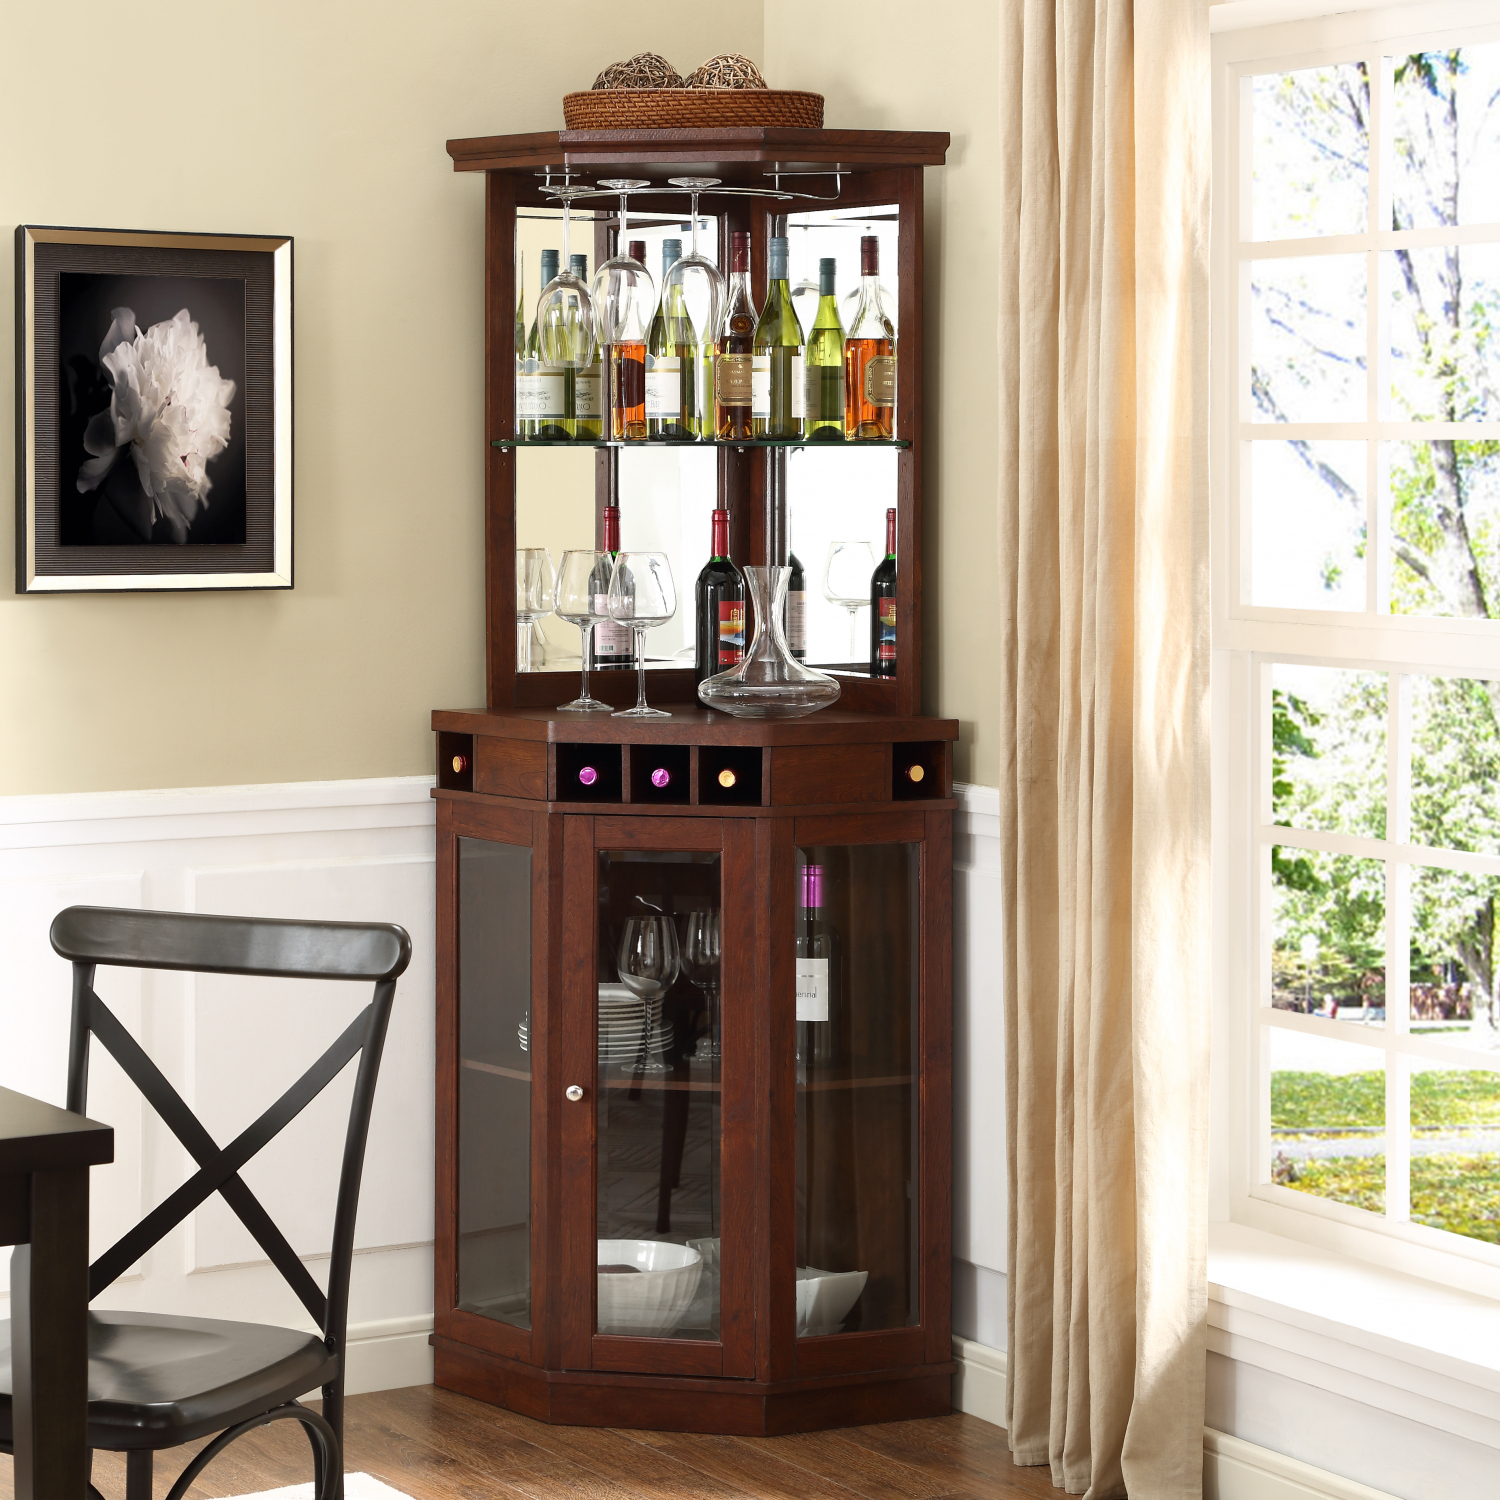 Details About Mini Bars Liquor Cabinet Whiskey Cabinets Wine Storage Wooden Home Bar Furniture with regard to measurements 1500 X 1500